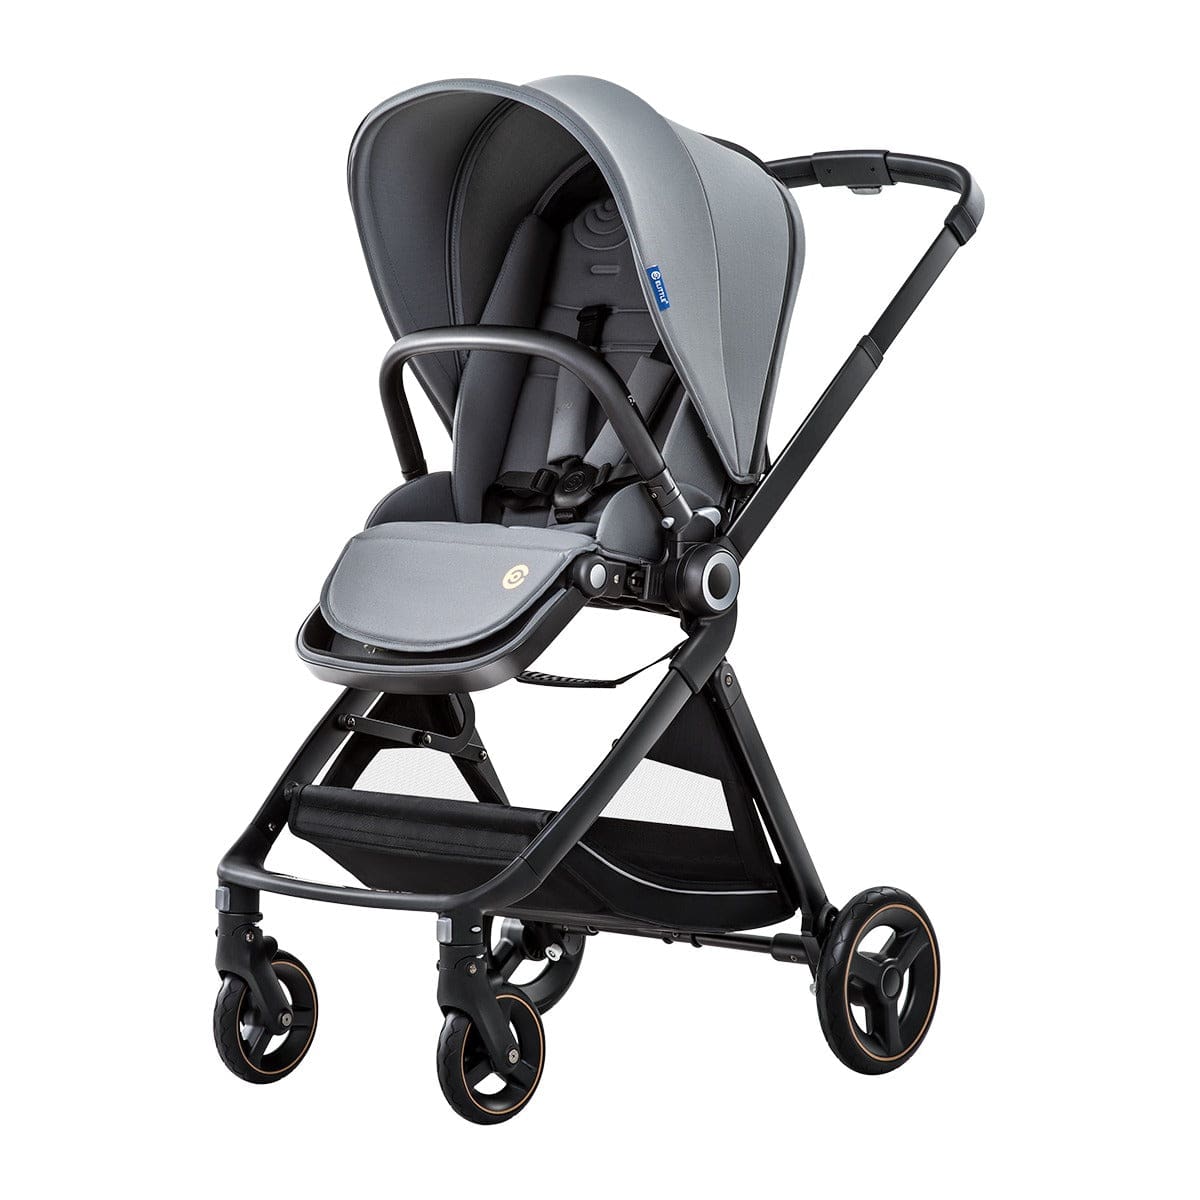 Poussette voyage compact Baby stone